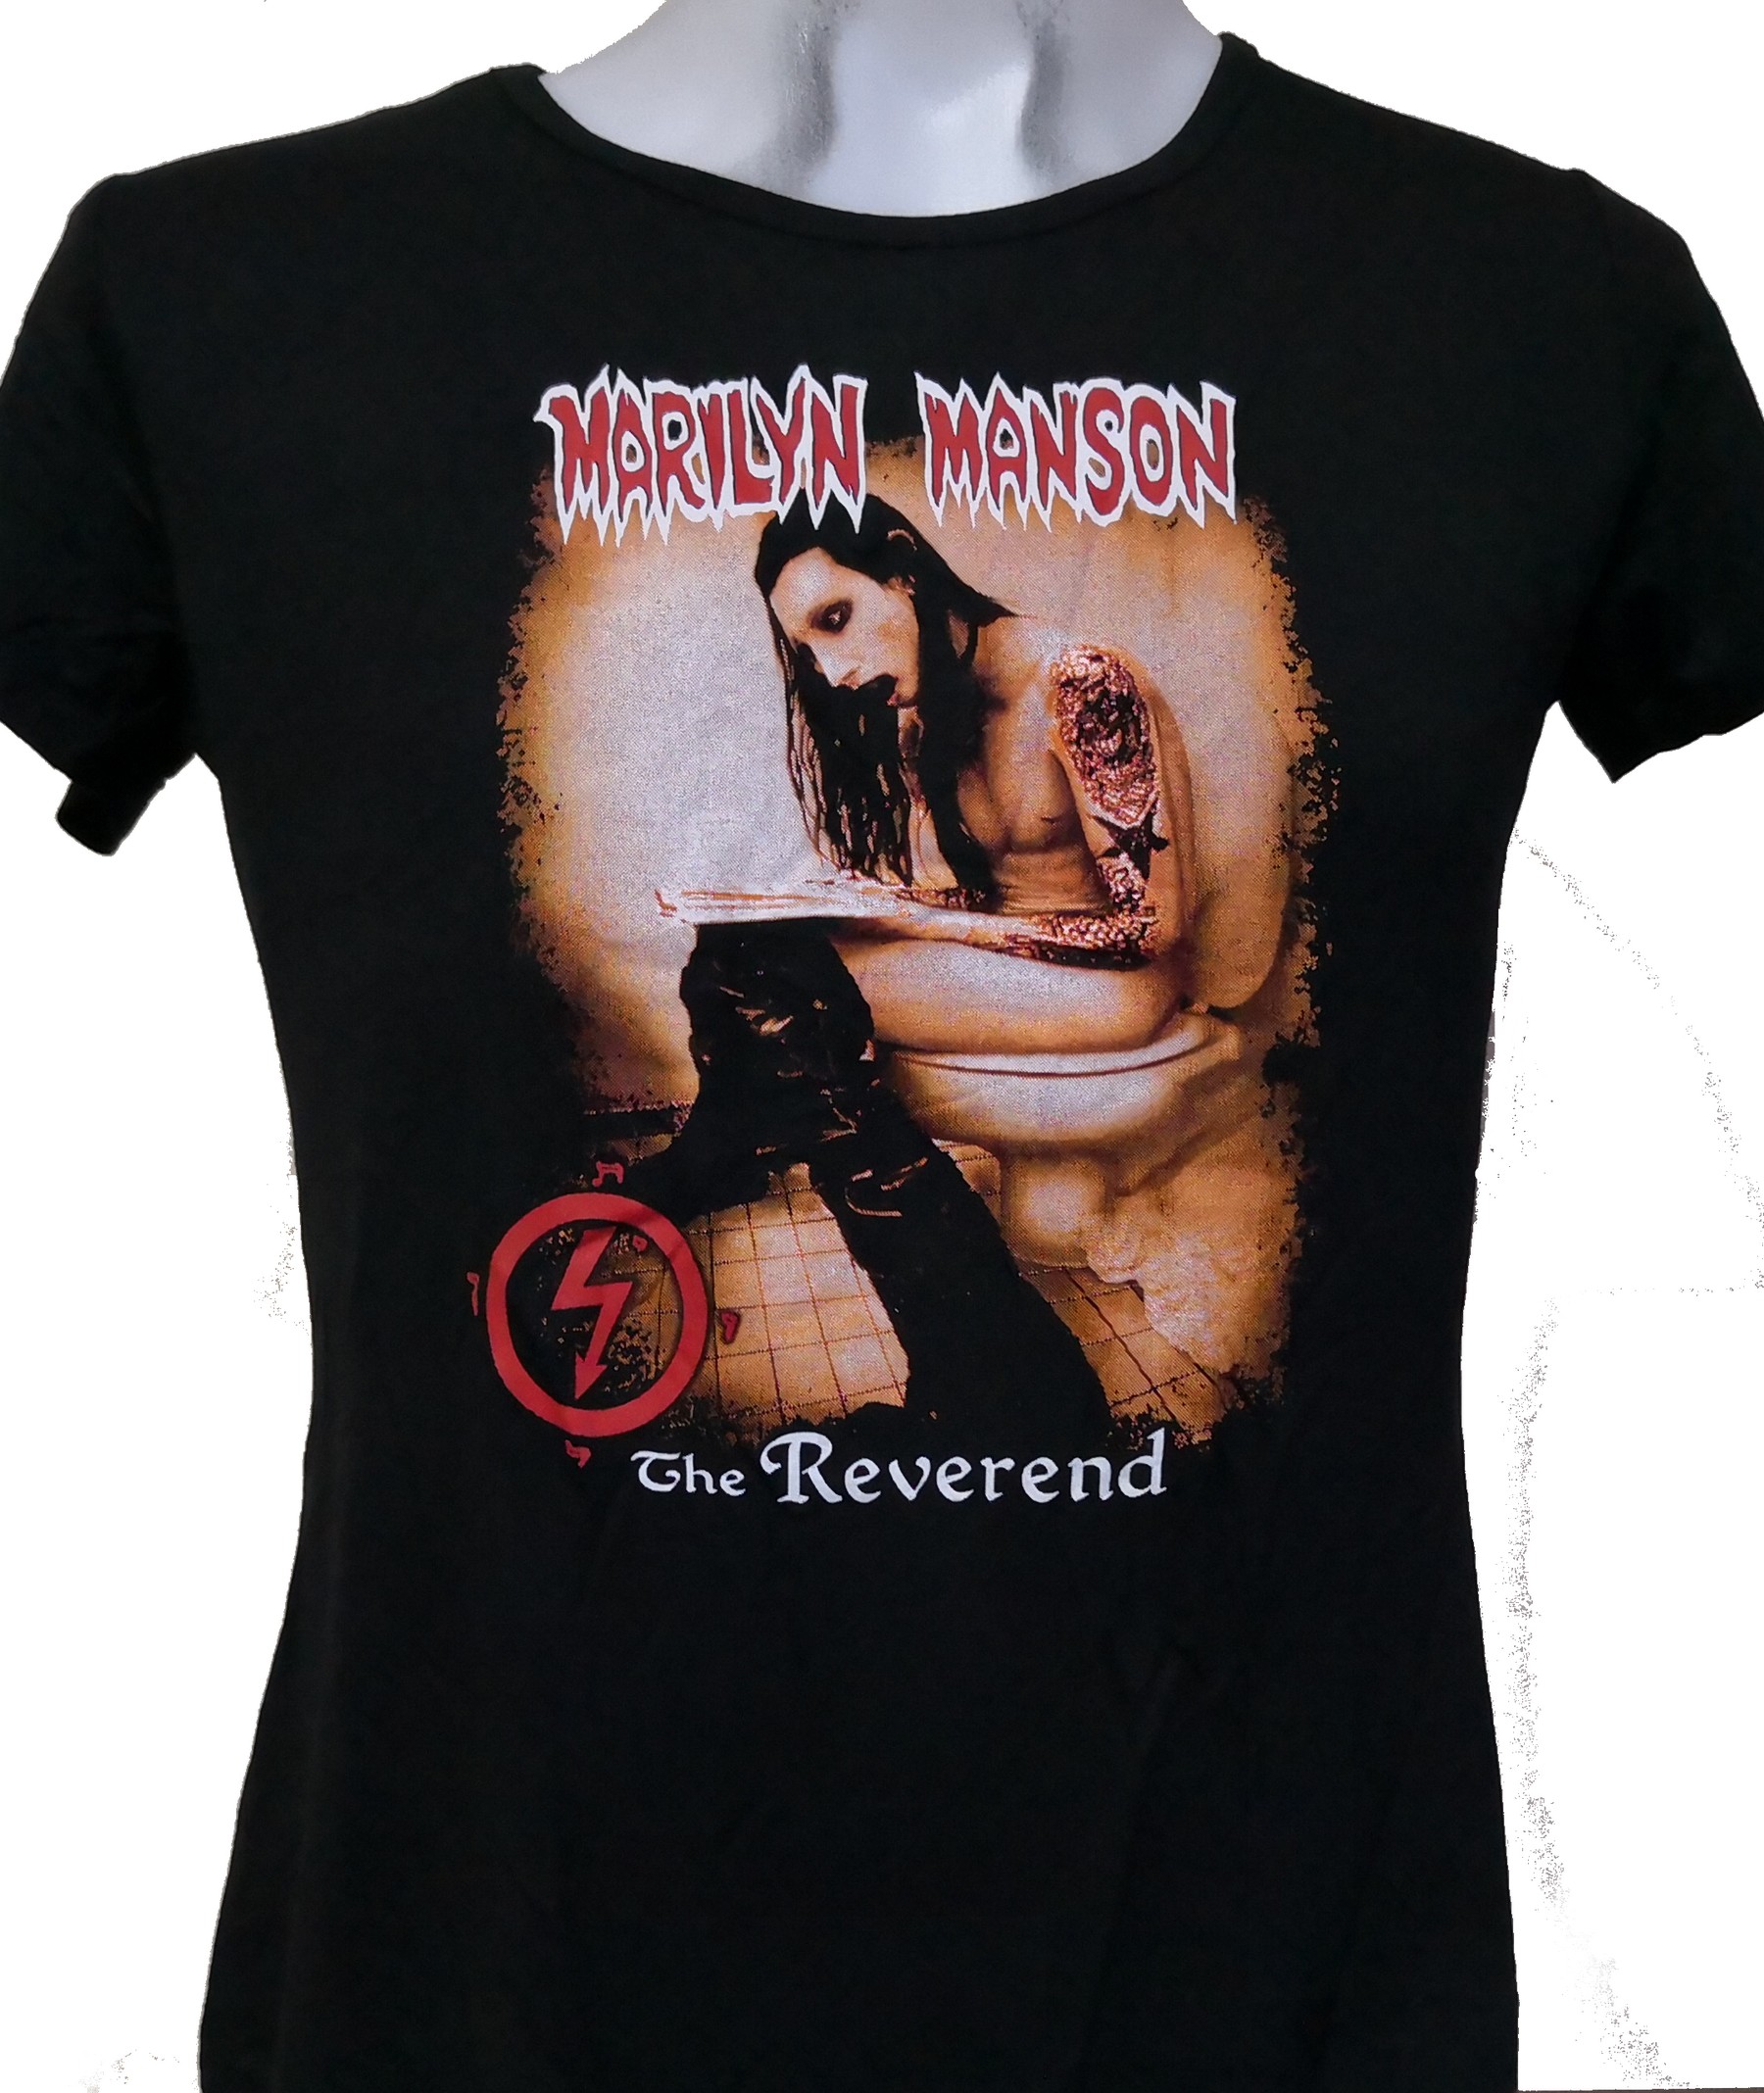 Marilyn Manson girly t-shirt size XL The Reverend